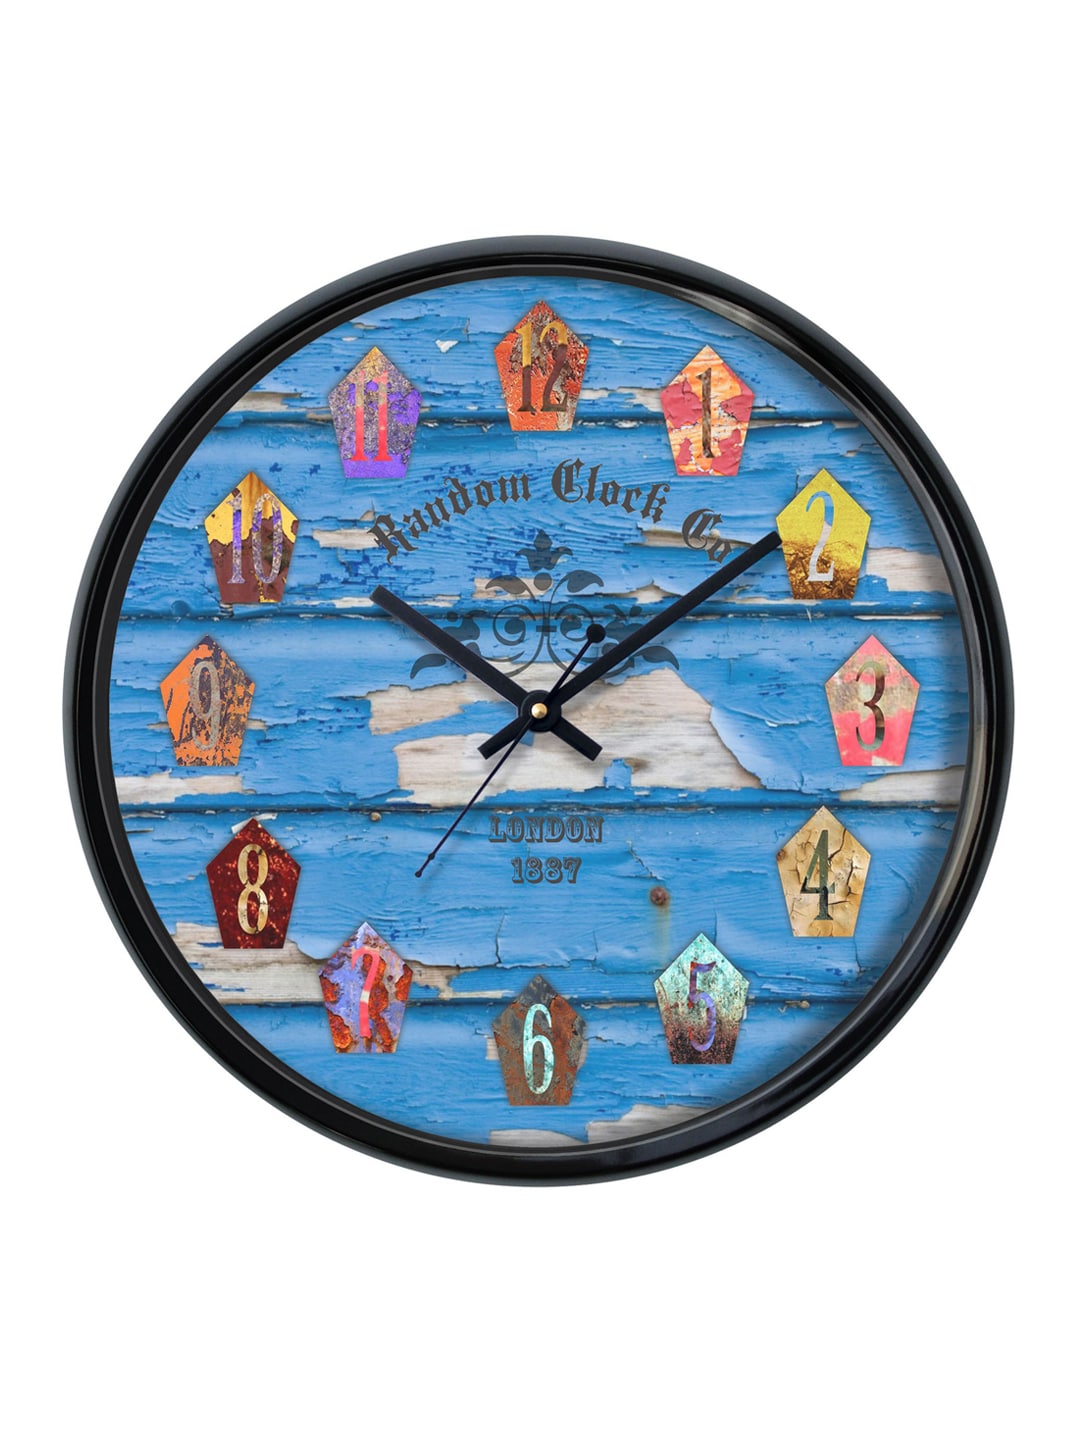 RANDOM Blue Round Printed Analogue Wall Clock Price in India